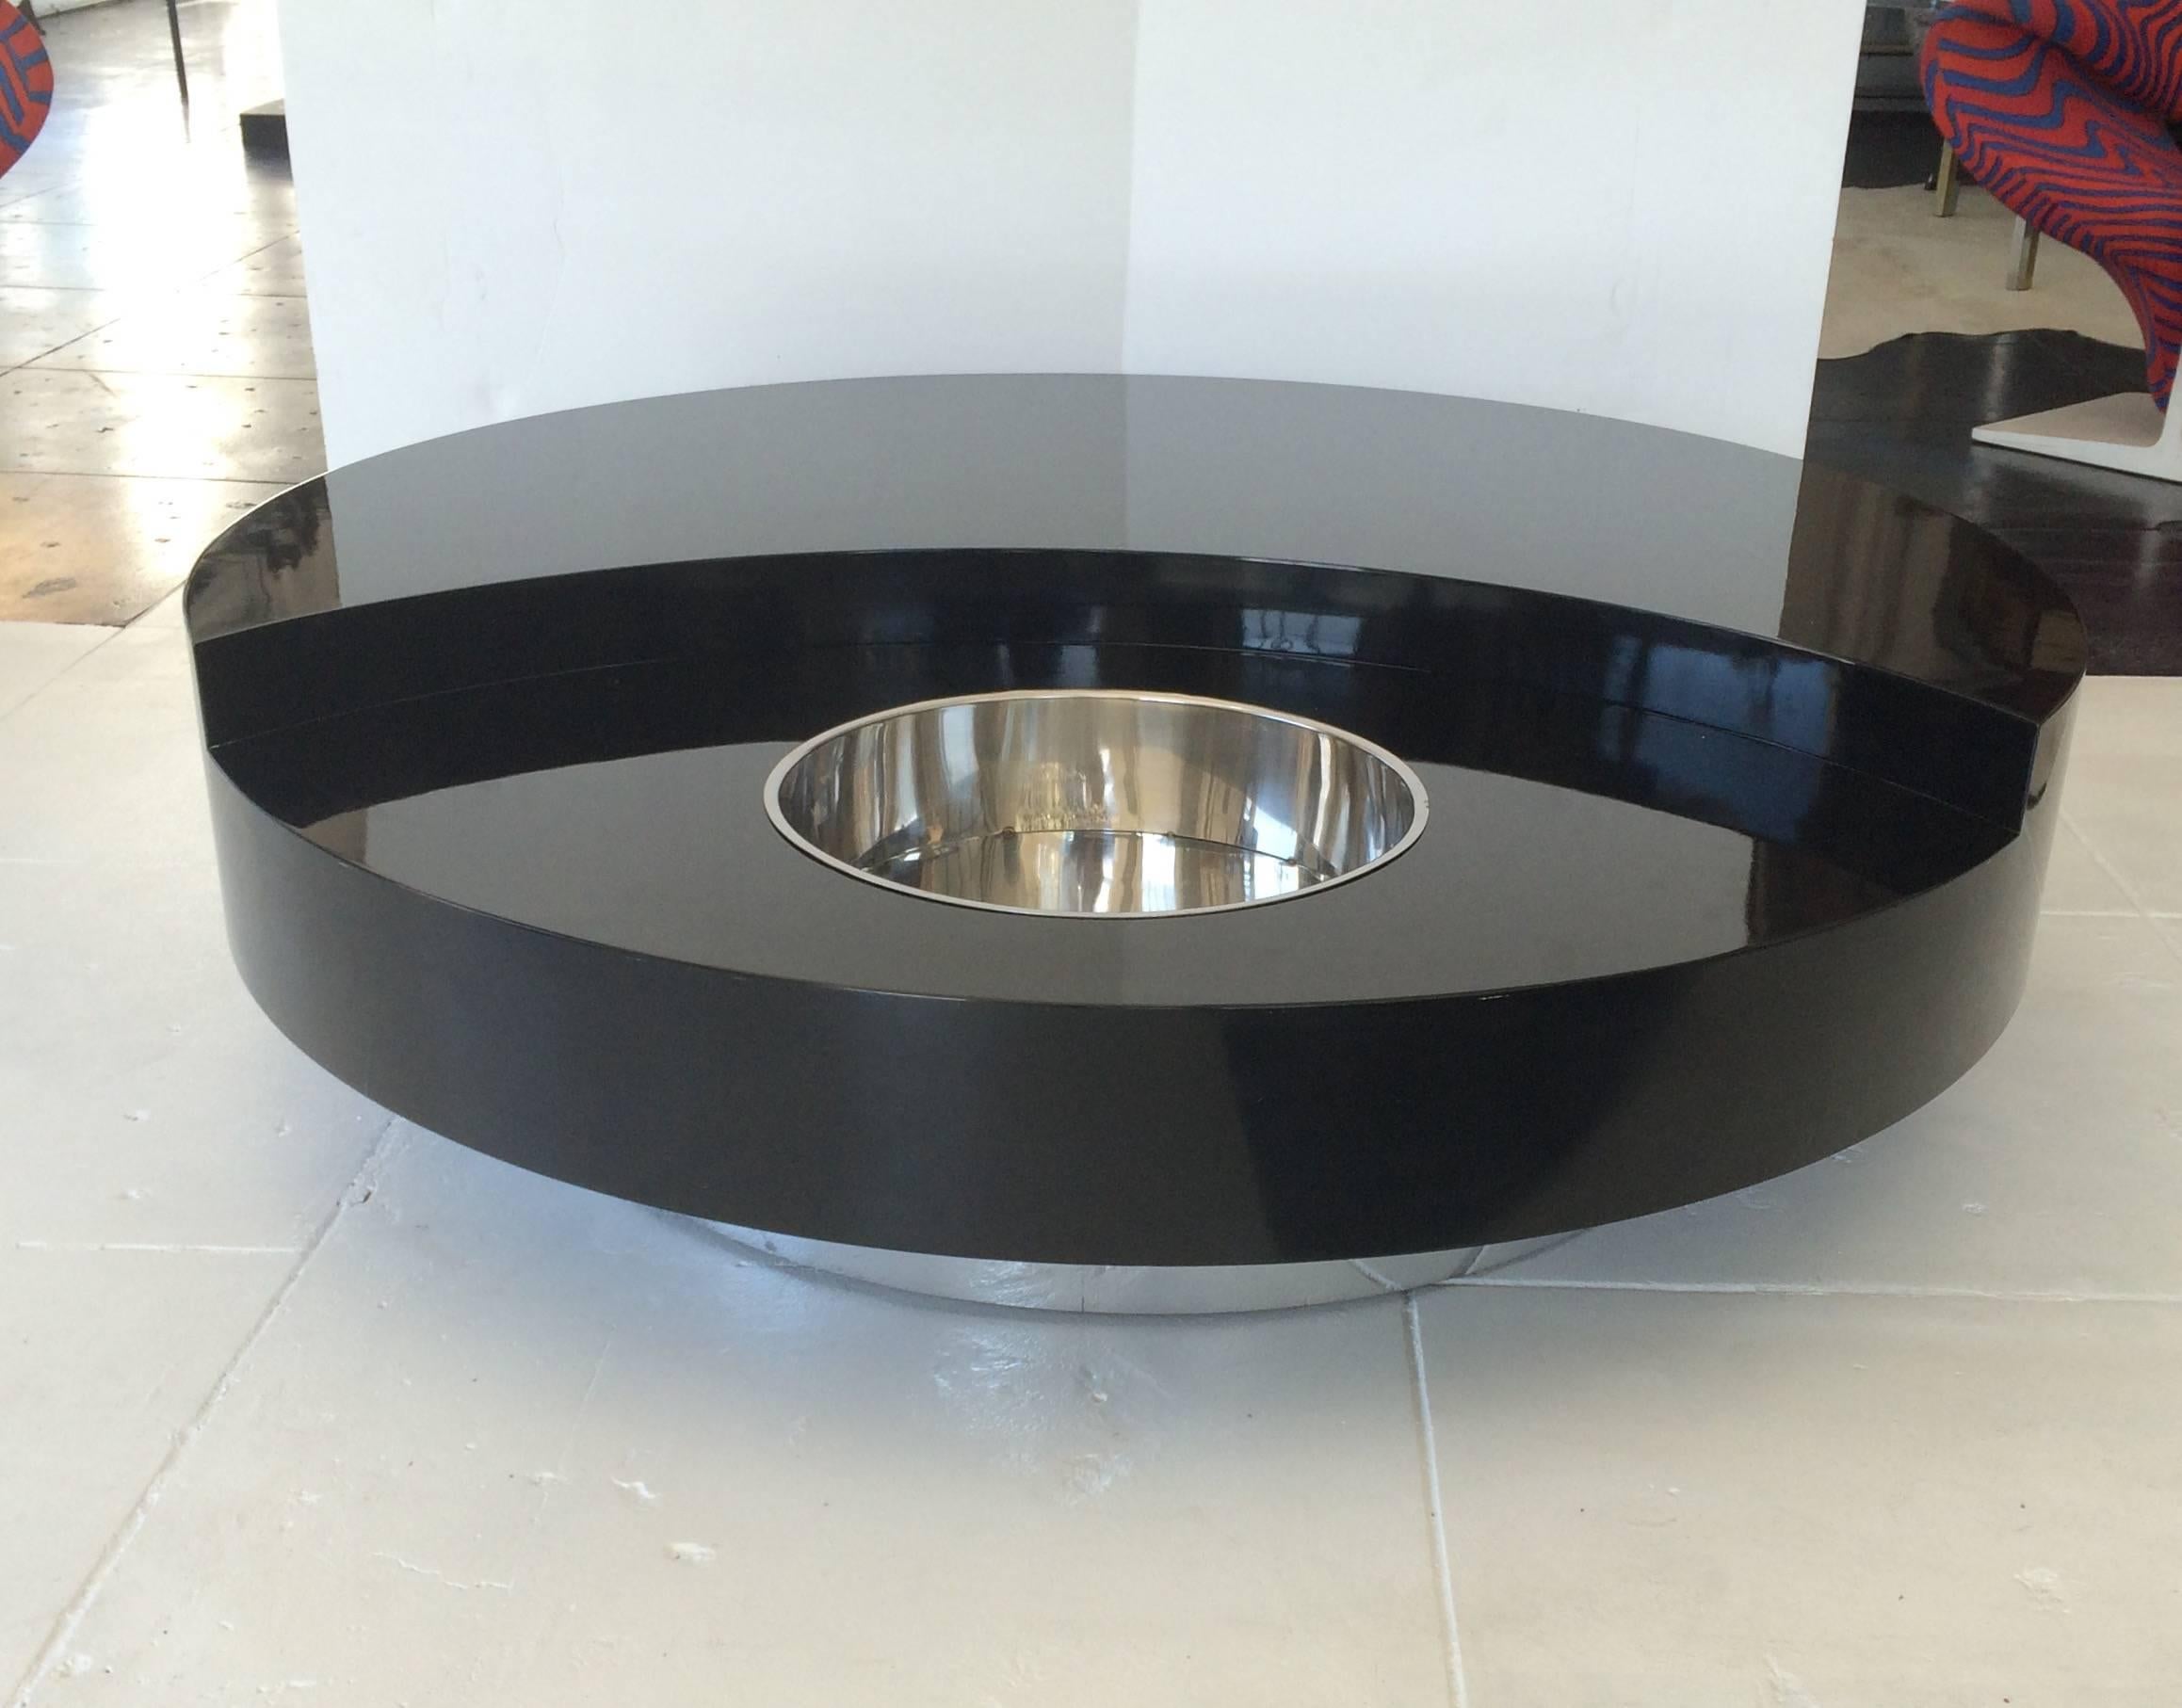 Most incredible Revolving Coffee Table by Willy Rizzo, 1960s. Black lacquer with stainless steel base and bar tray.